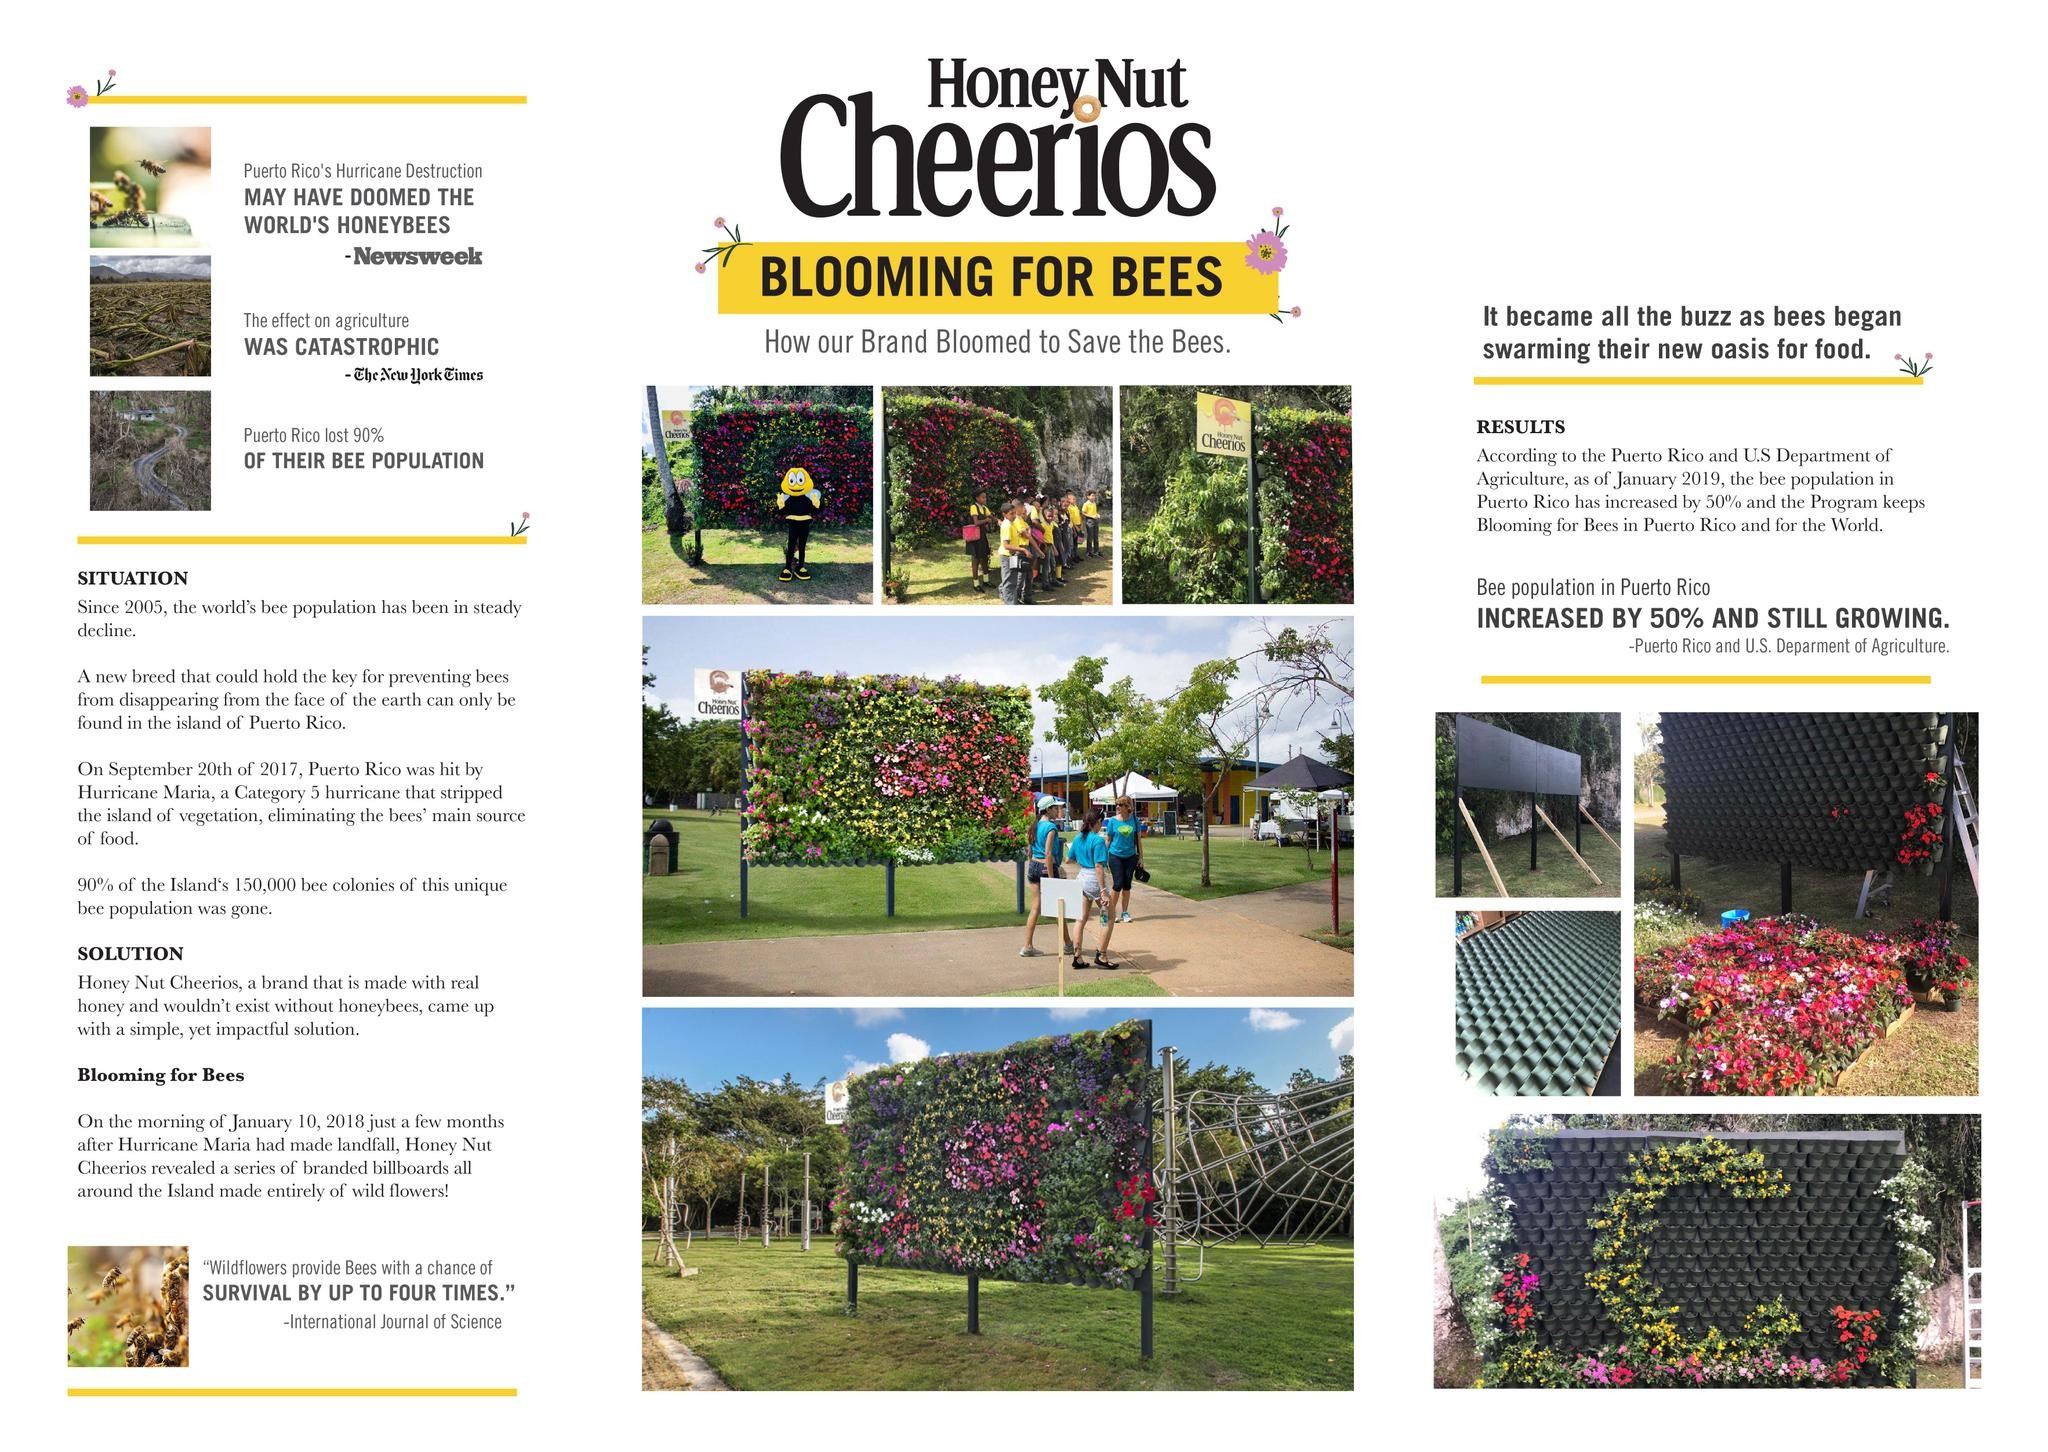 Blooming for Bees